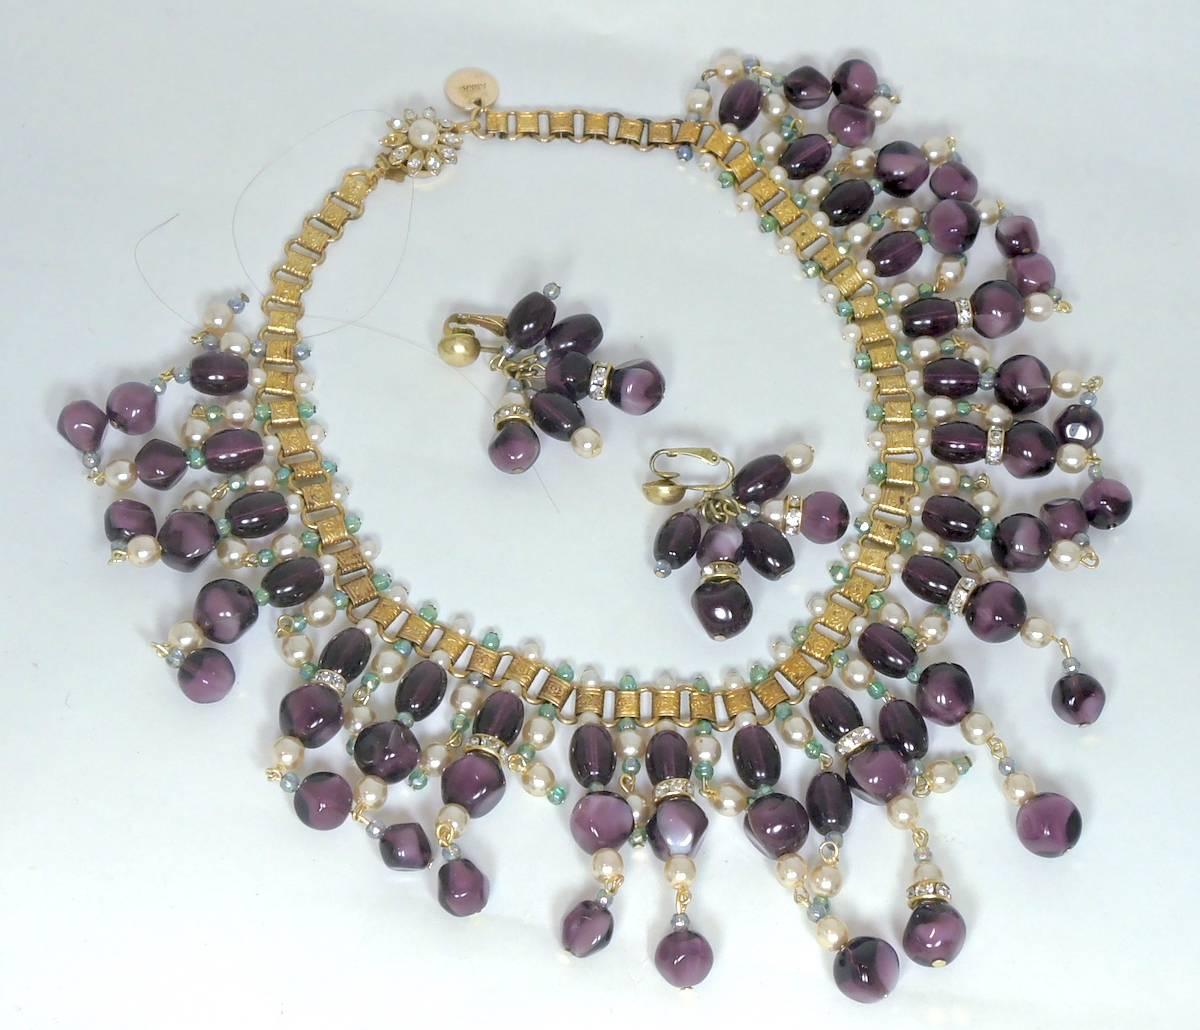 This vintage signed Anka set features faux pearls, bezel cut purple glass beads, and blue tiny beads in a gold tone setting. This necklace measures 16” x 3” and has a slide in clasp. The matching clip earrings measure 2” x 1-1/2”. This set is signed